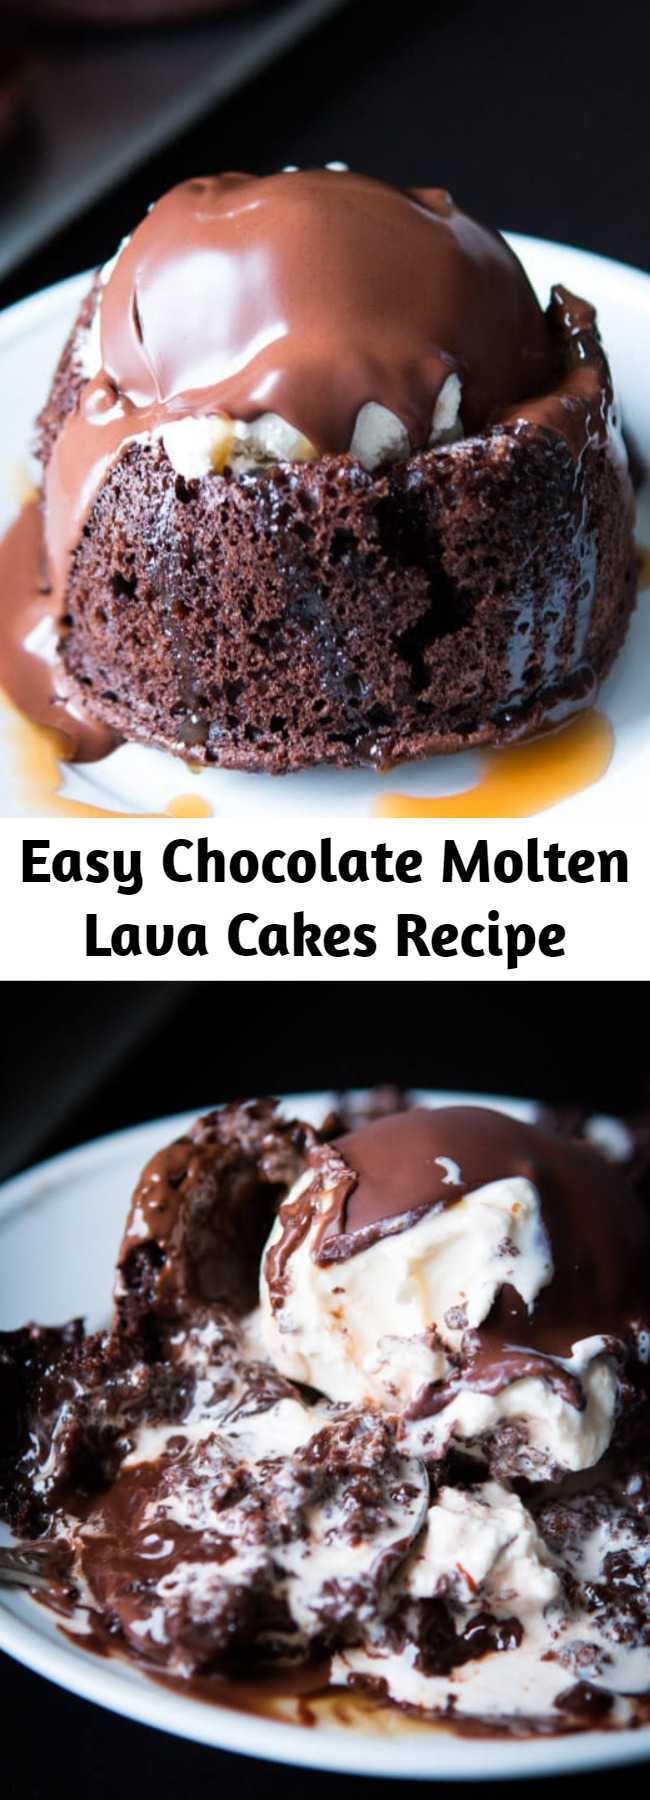 Easy Chocolate Molten Lava Cakes Recipe - Homemade molten lava cakes are way easier to make than you'd think, and that hot fudge oozing out is such a crowd pleaser! Don't forget to serve with a scoop of ice cream!